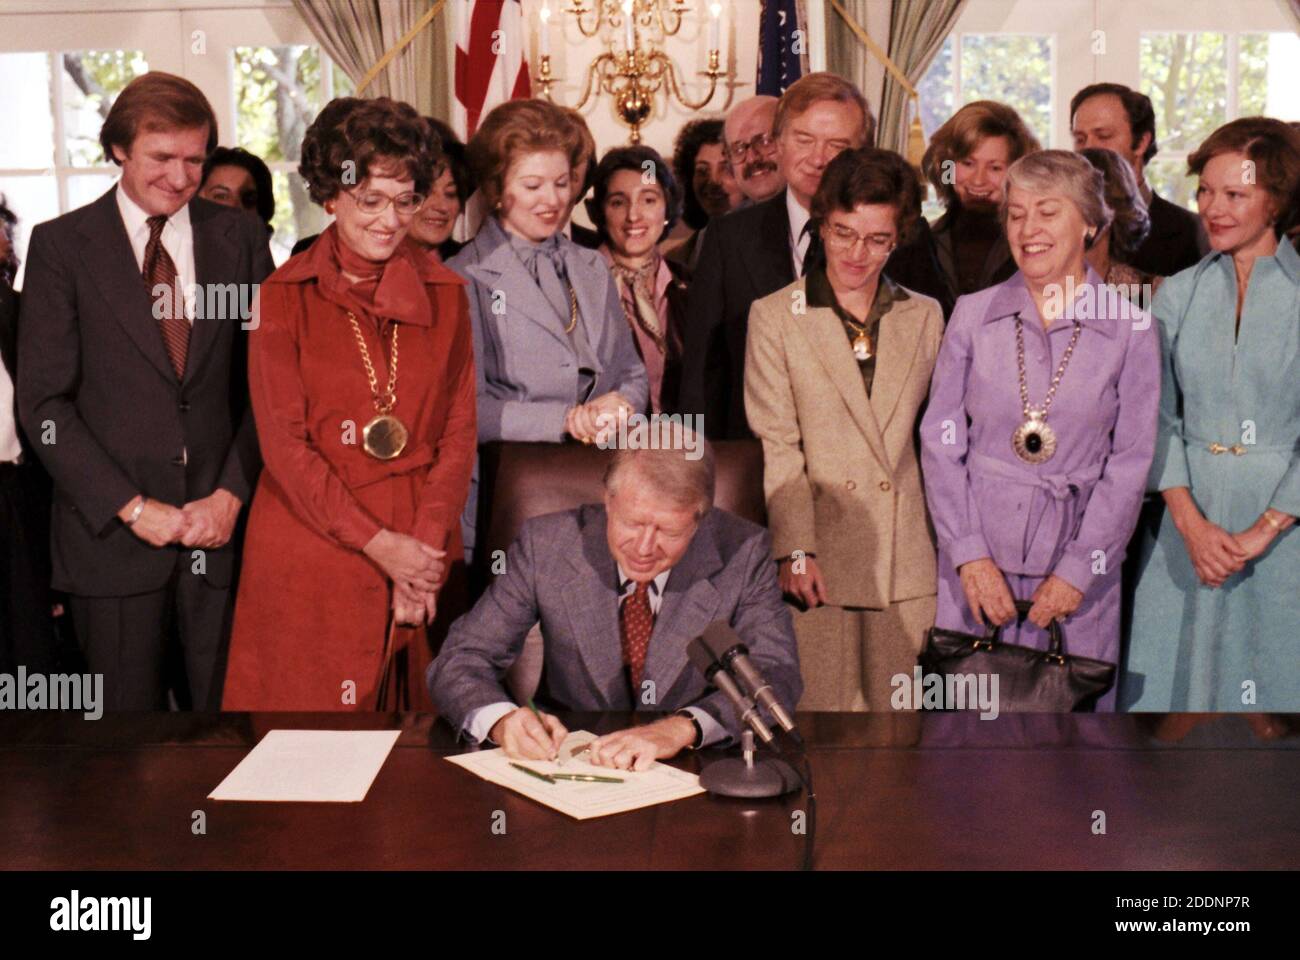 President Jimmy Carter signs the House of Representative resolution proposing the Equal Rights Amendment (ERA) before it was sent to the states for ratification in 1978. The Equal Rights Amendment was supported by those who believed that women did not have equal status to men in the United States and who hoped to force change. The ERA failed to gain ratification by the required number of states and therefore was not made into law. Stock Photo